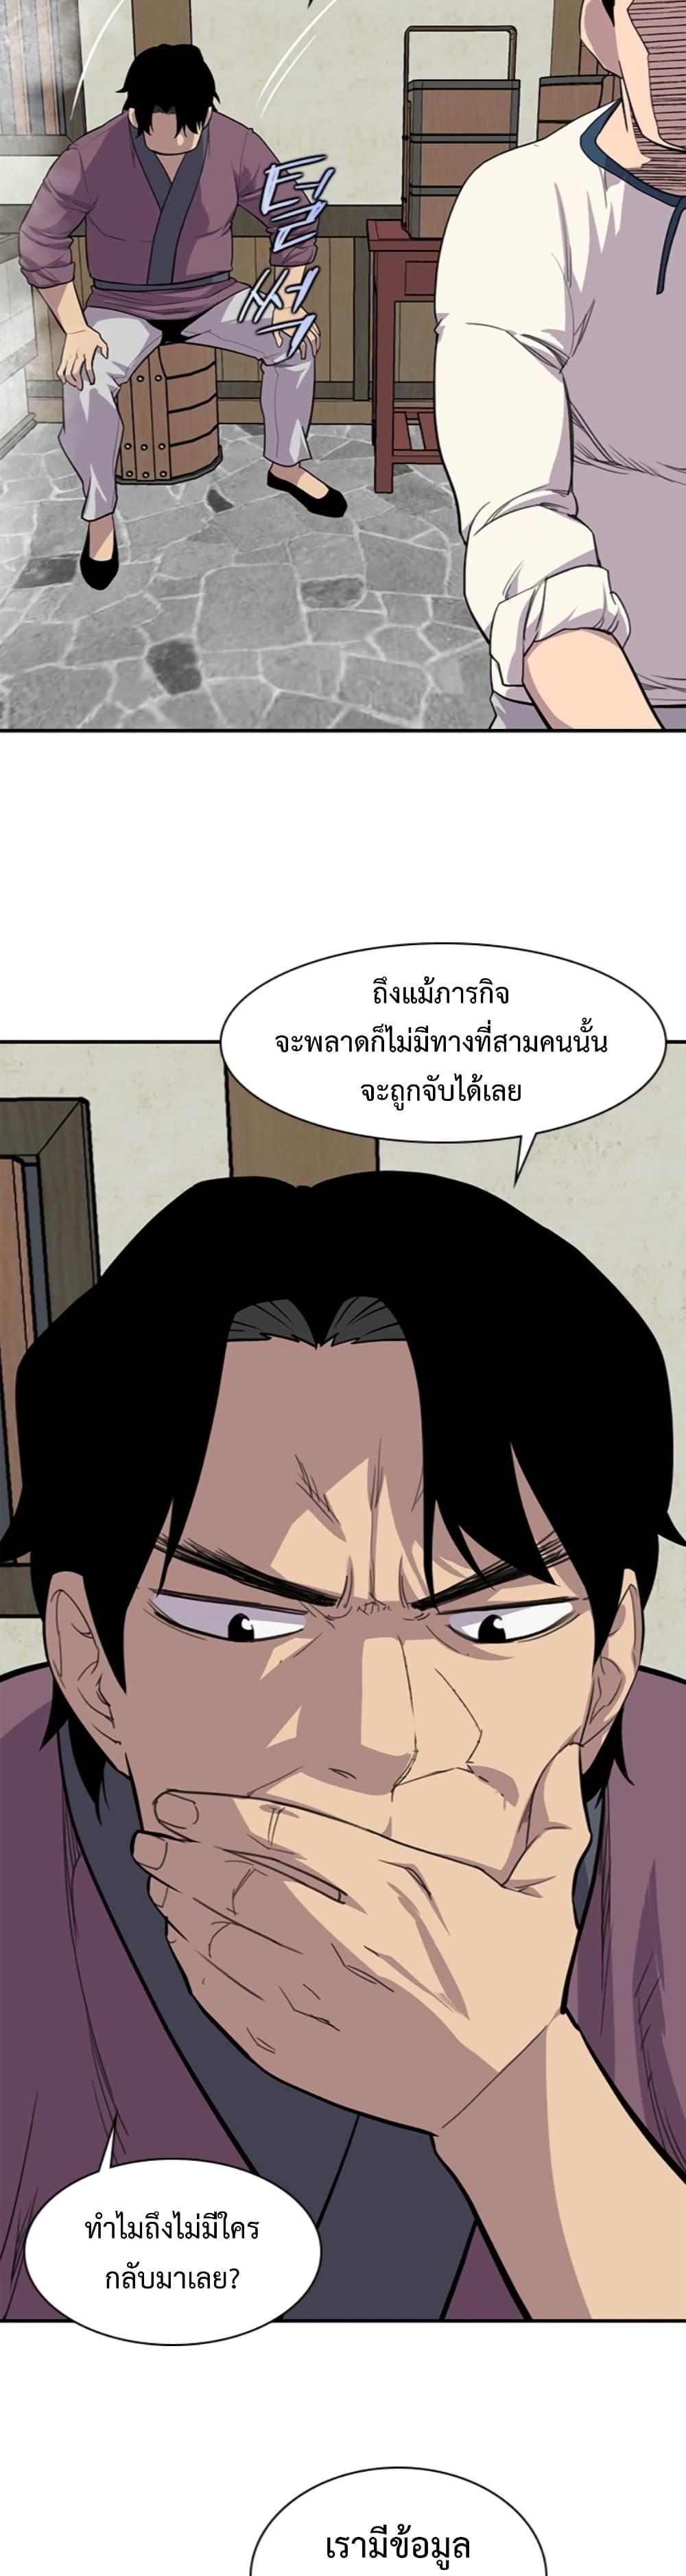 The Strongest Ever à¸à¸­à¸à¸à¸µà¹ 33 (45)